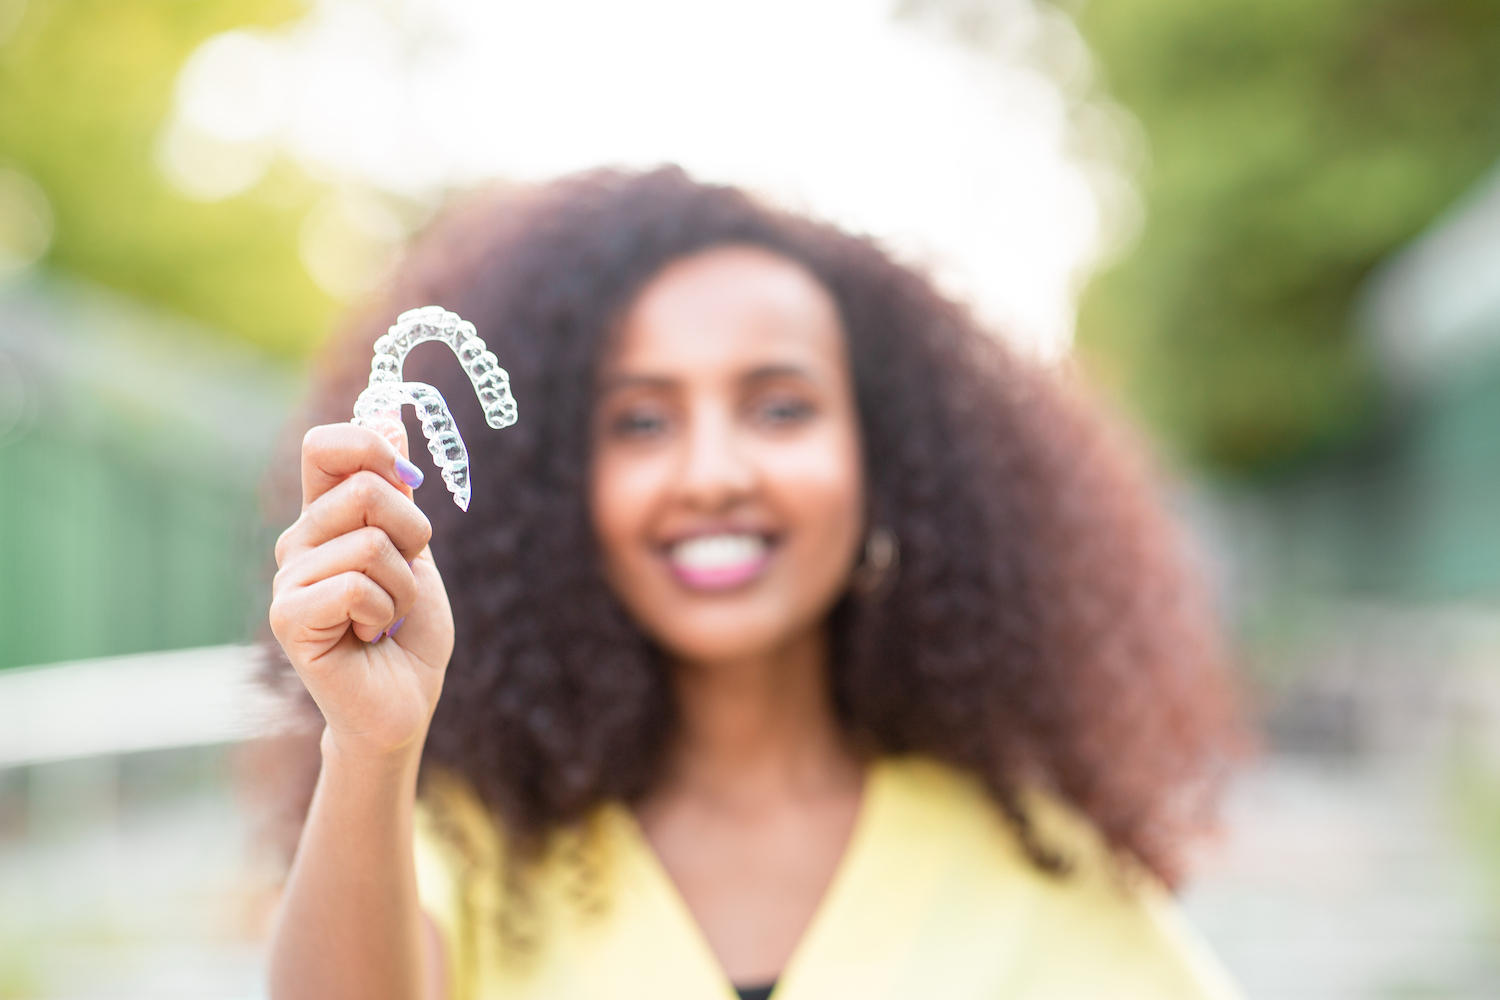 clear aligner therapy, clear aligners, braces, orthodontics